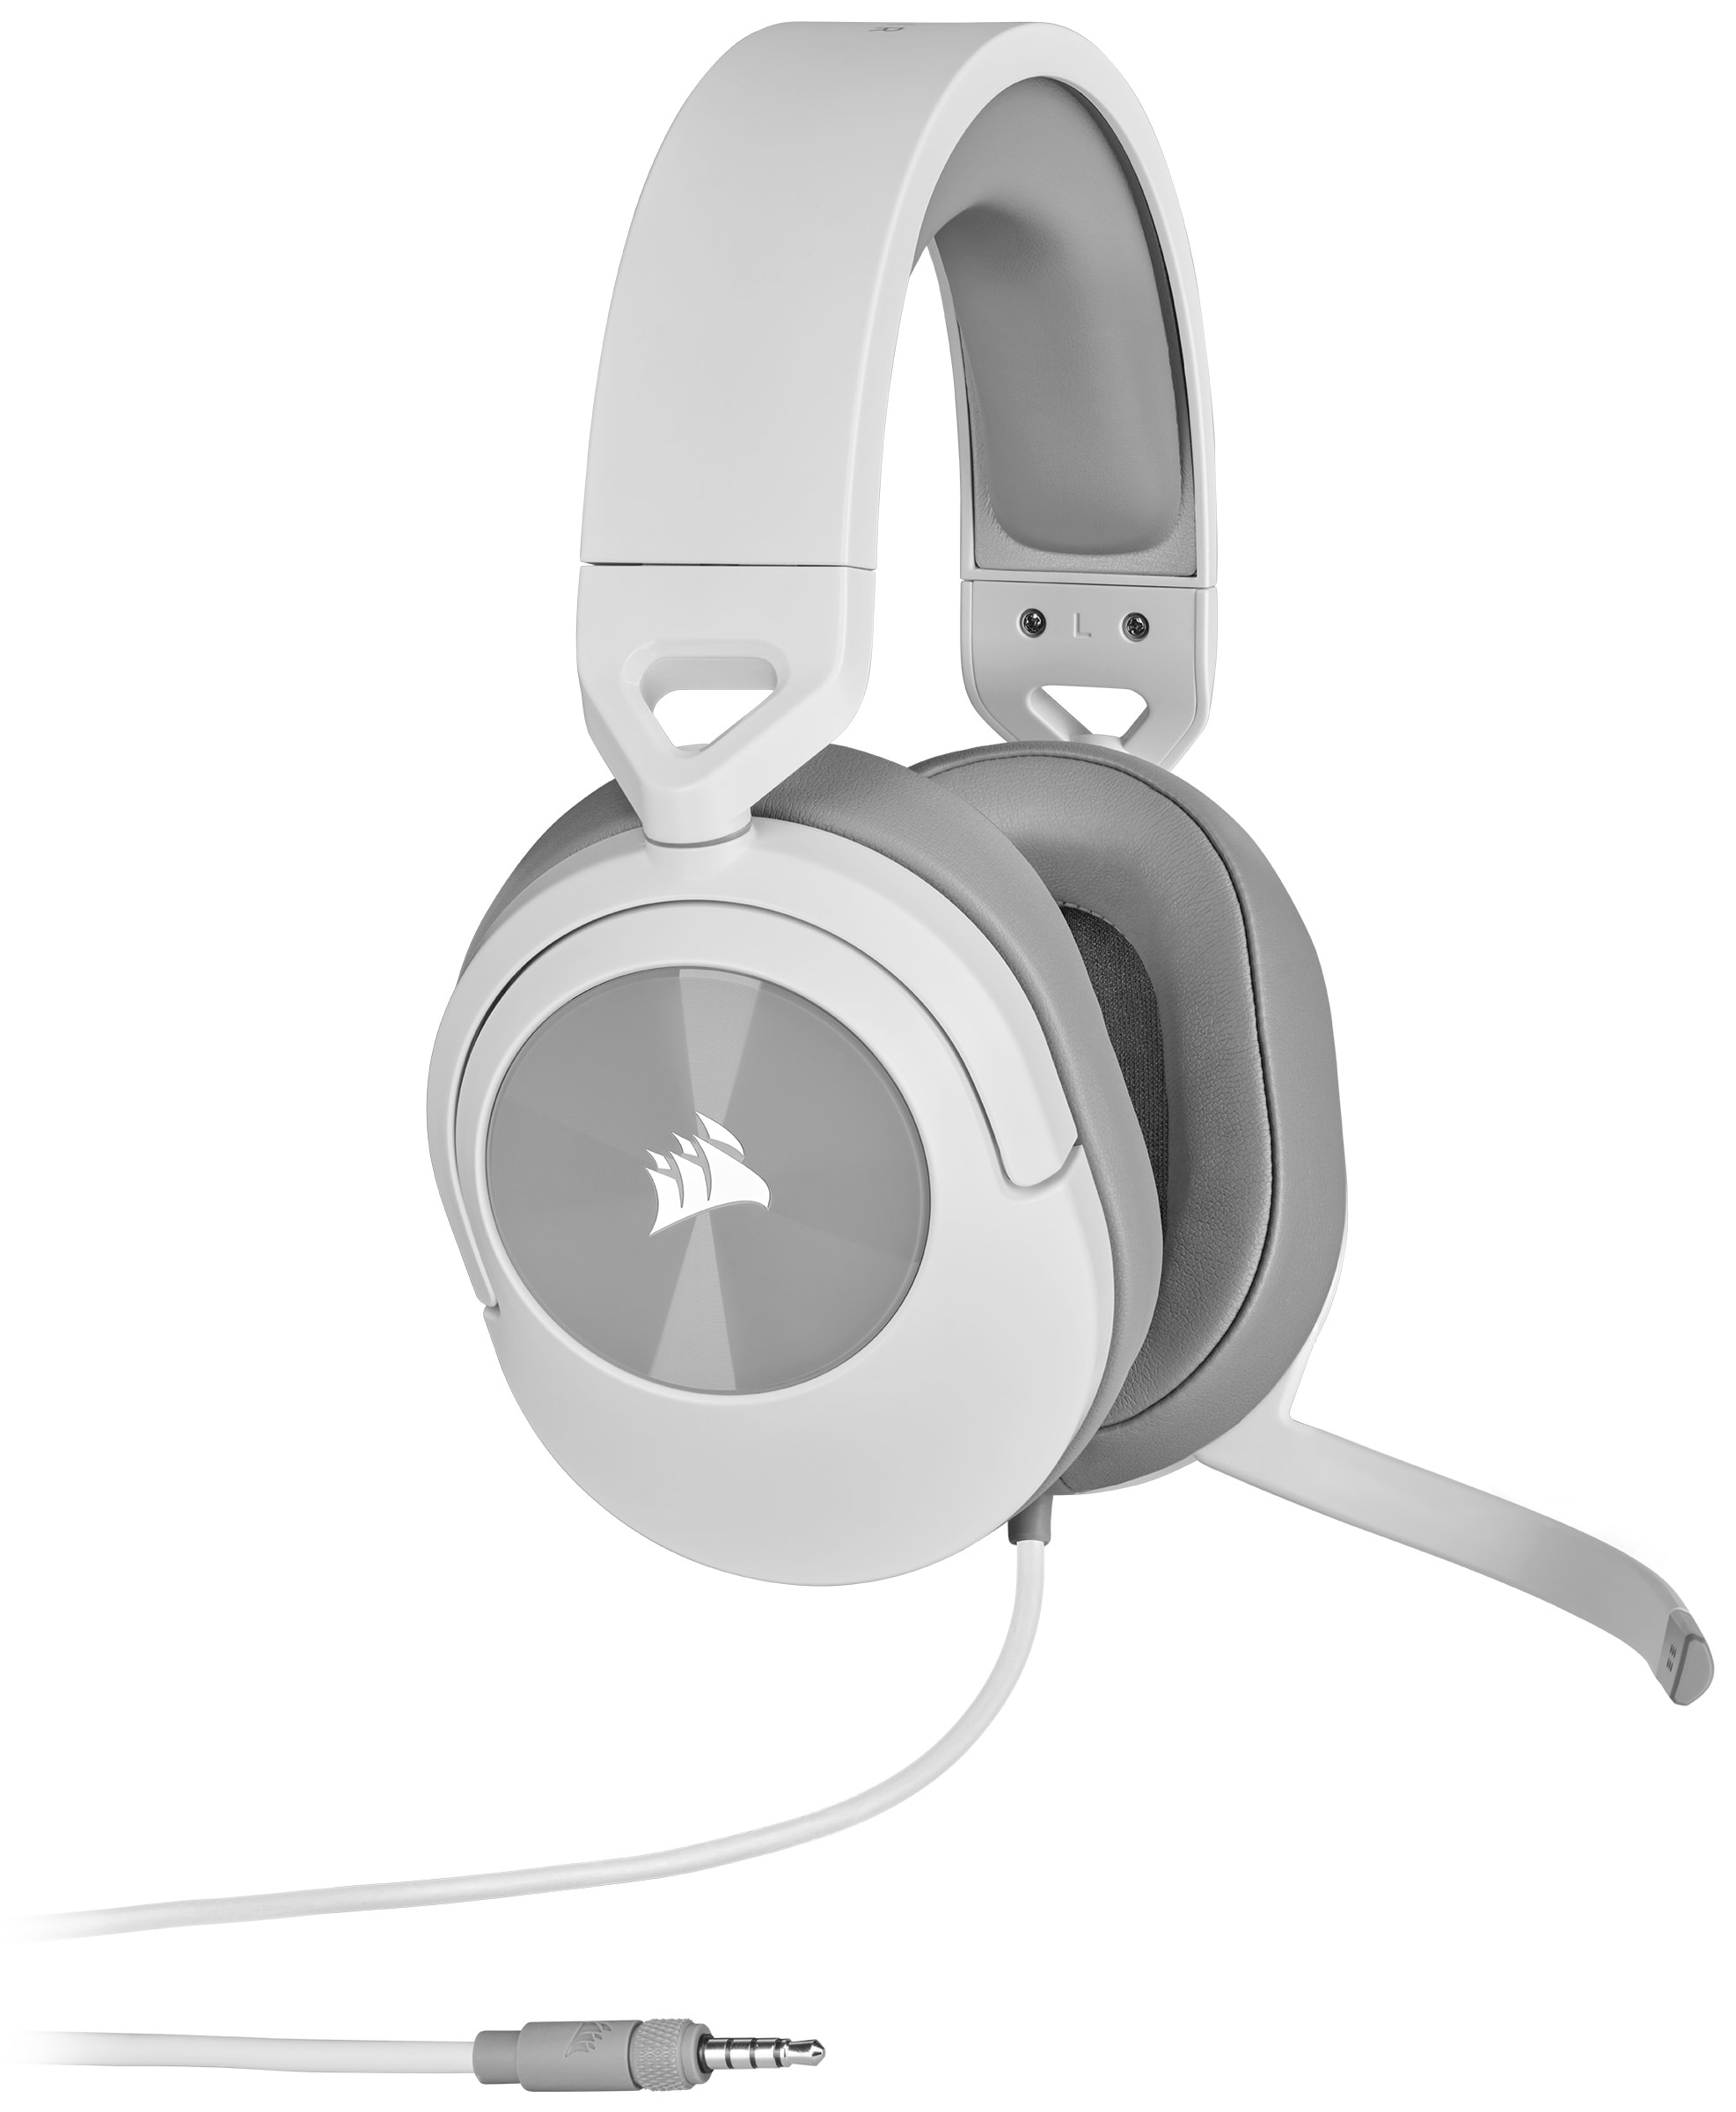 | Corsair Gaming-Headset Carbon« Stereo UNIVERSAL kaufen »HS55